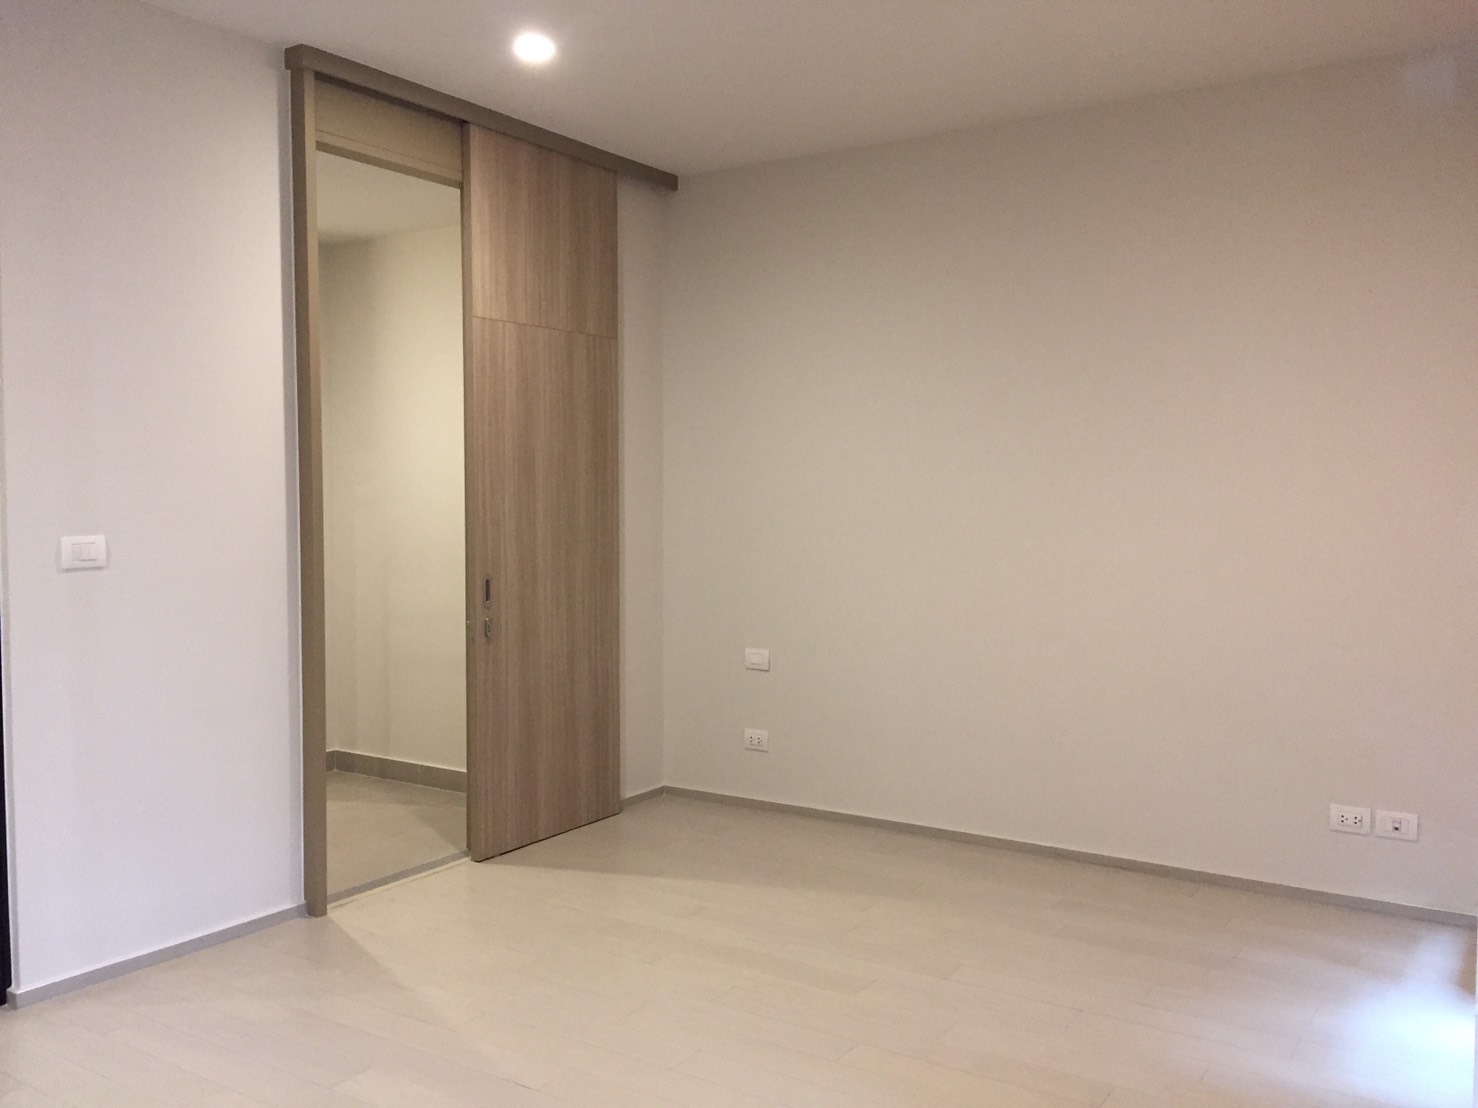 Brand New, Noble Ploenchit condo for sale, Luxury Zone, High floor, Private lift, 1 bedroom size 51 sq.m. Sky walk to BTS Ploenchit and next to Central Embassy Park Plaza.